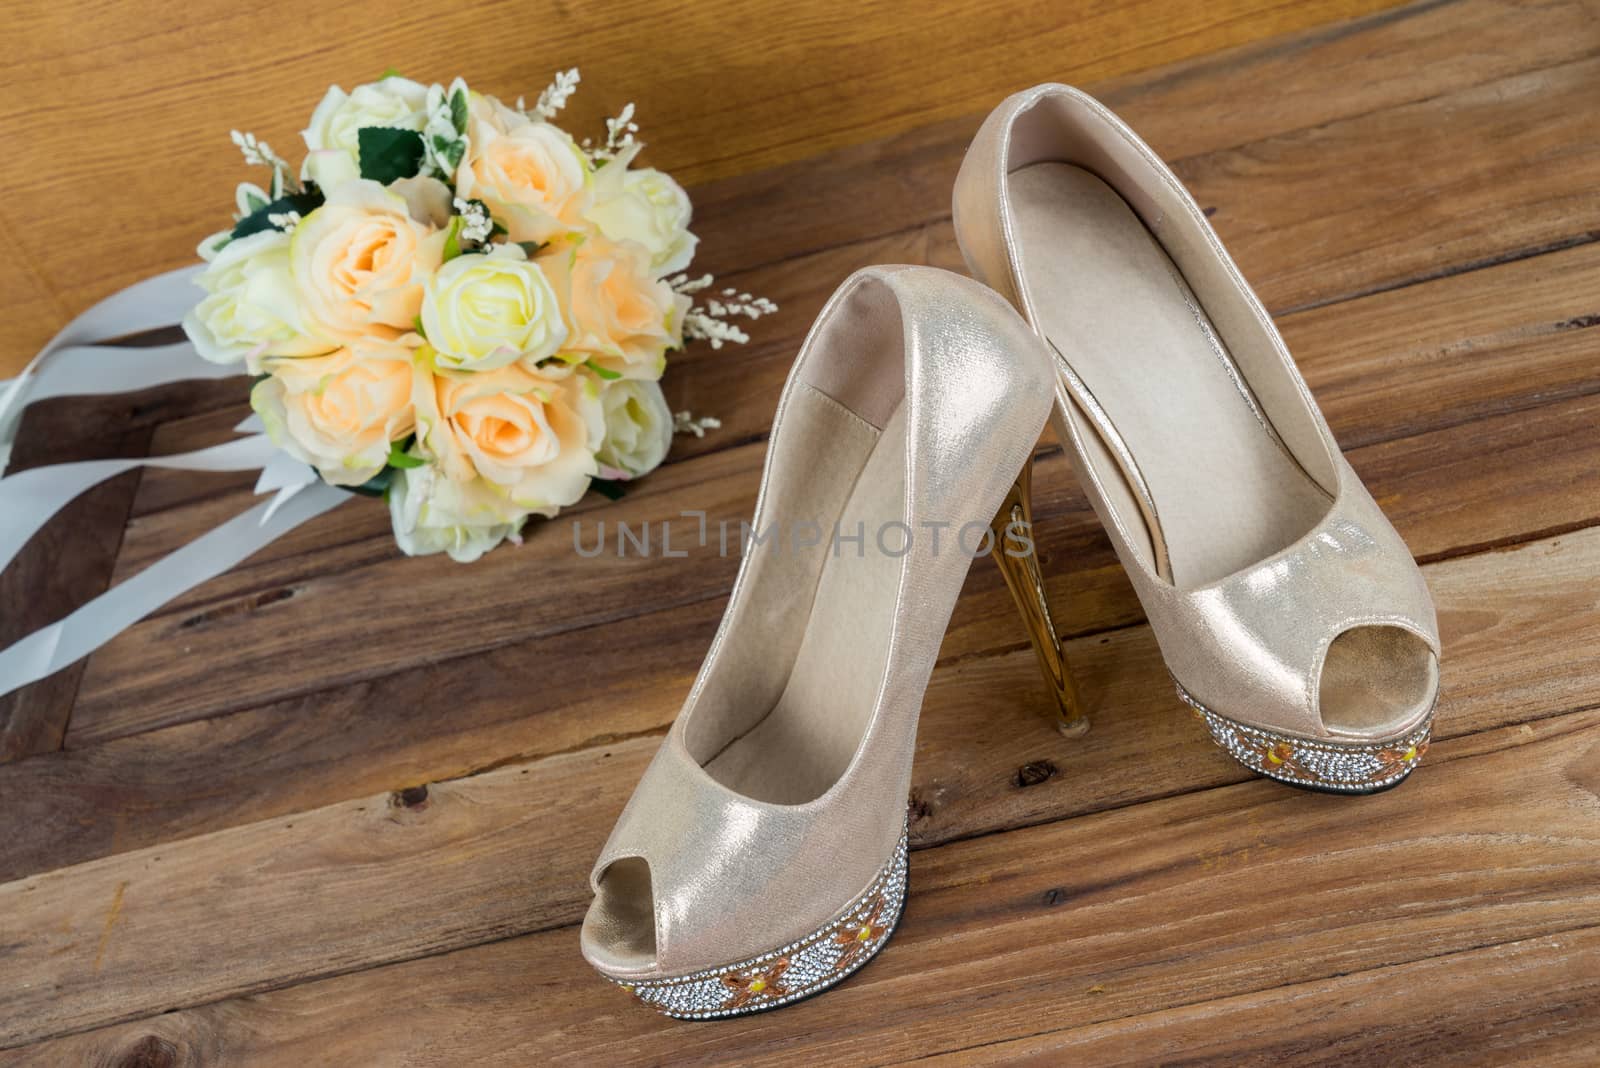 Wedding bouquet with bride's shoes on wood background by iamway